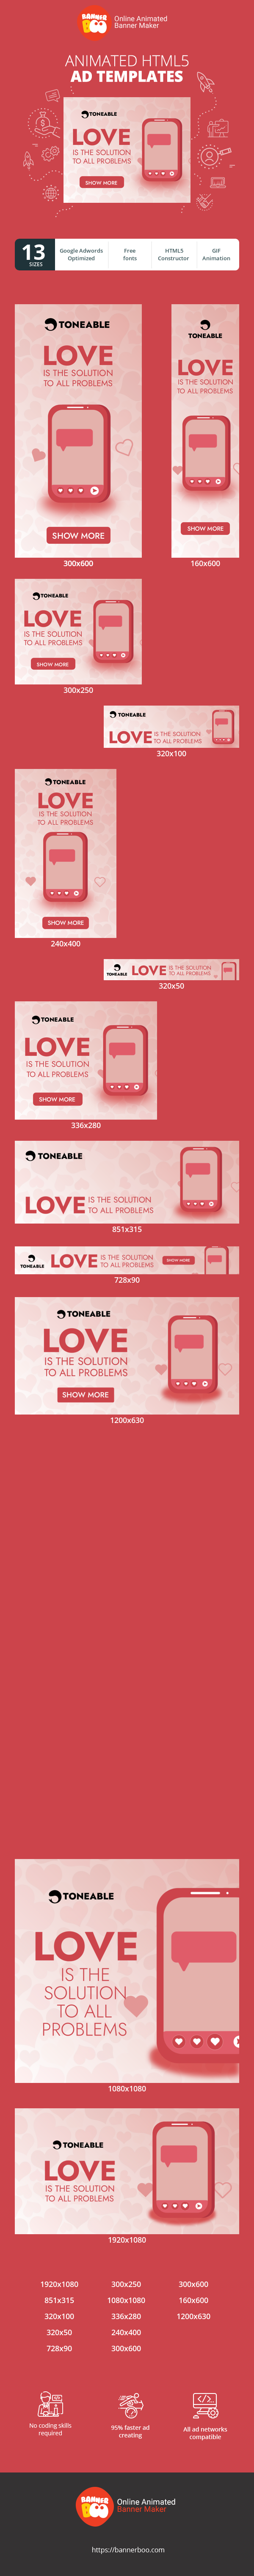 Banner ad template — Love Is The Solution To All Problems — Smartphone